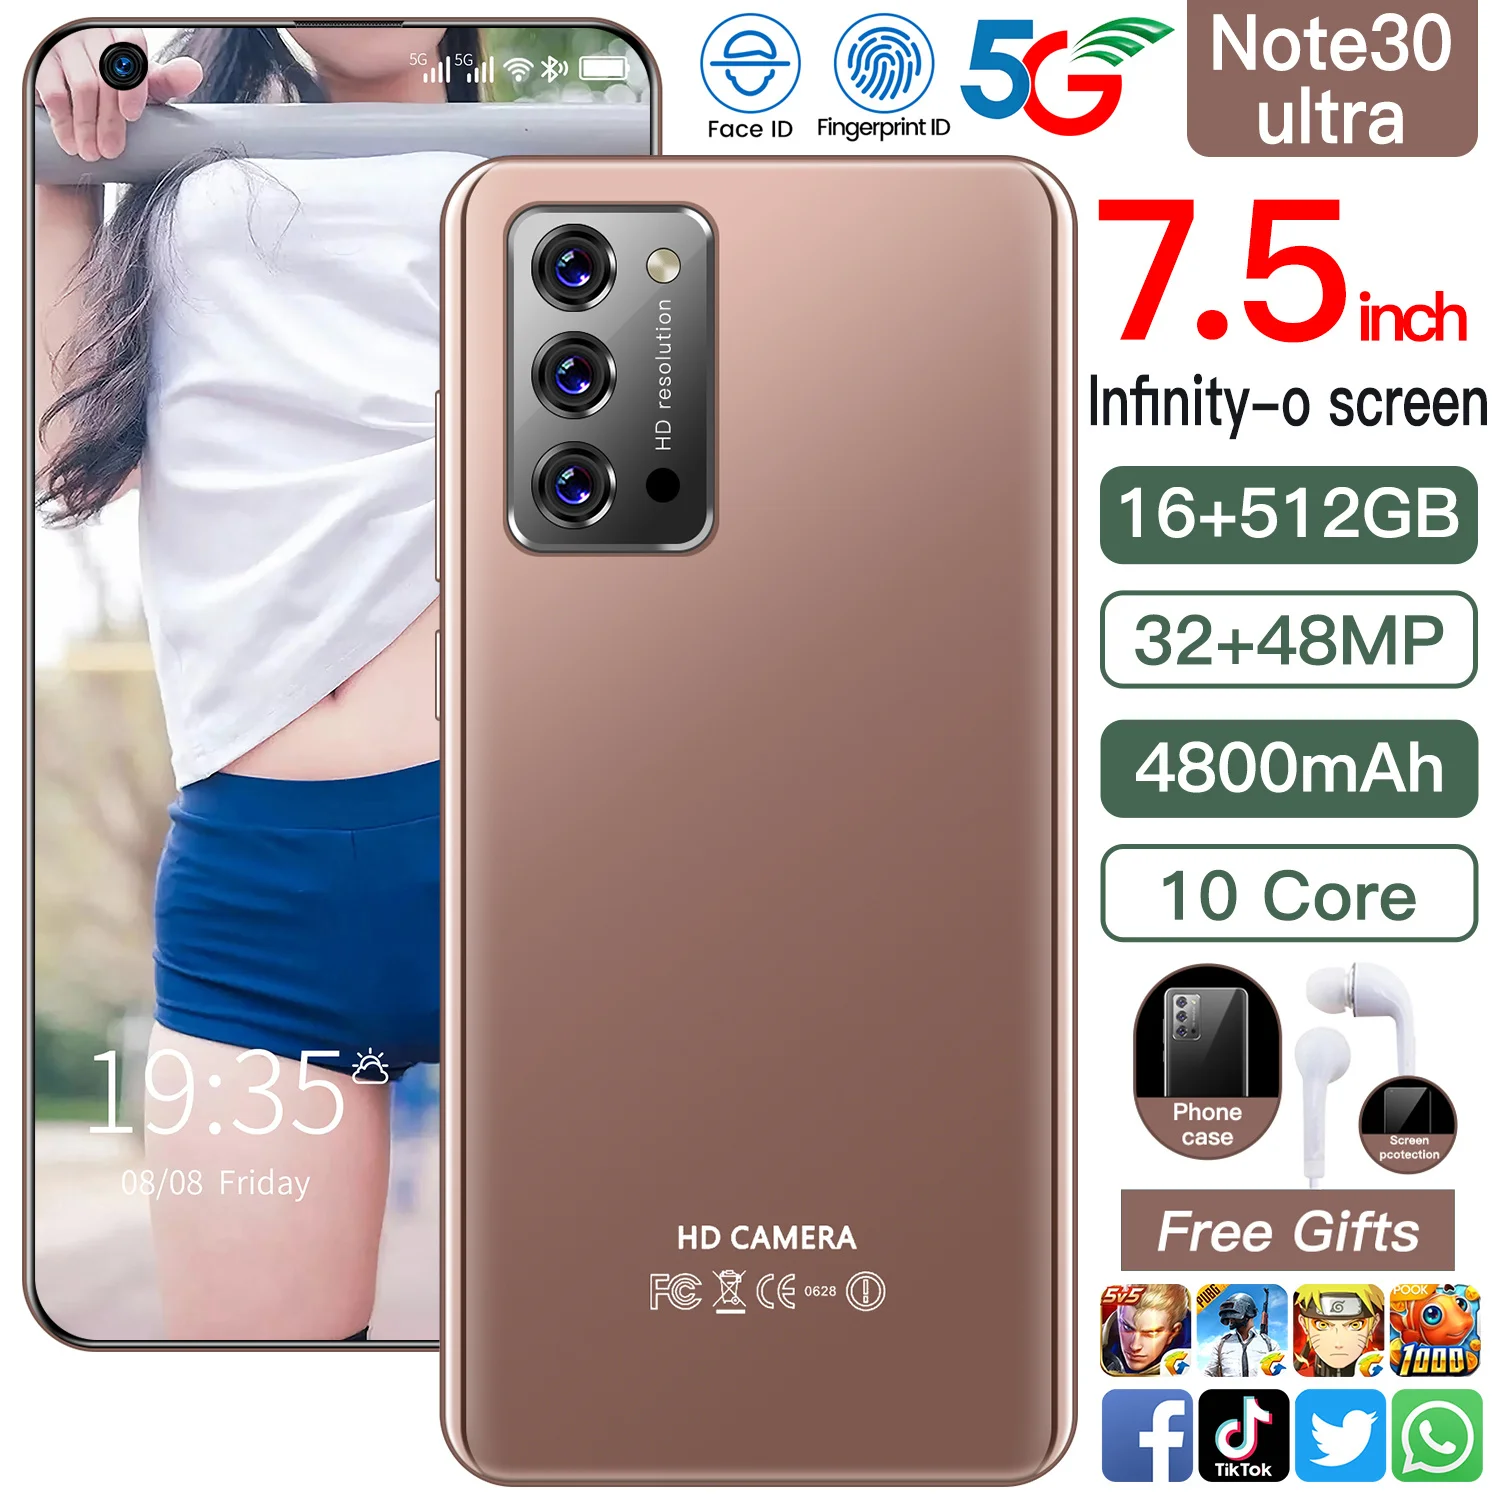 

New Hot Global Versoin Note30 Ultra 7.5 Inch Mobilephone Full Screen 4800mAh Android 10 16+512GB 32+48MP Face ID 5G Smartphone